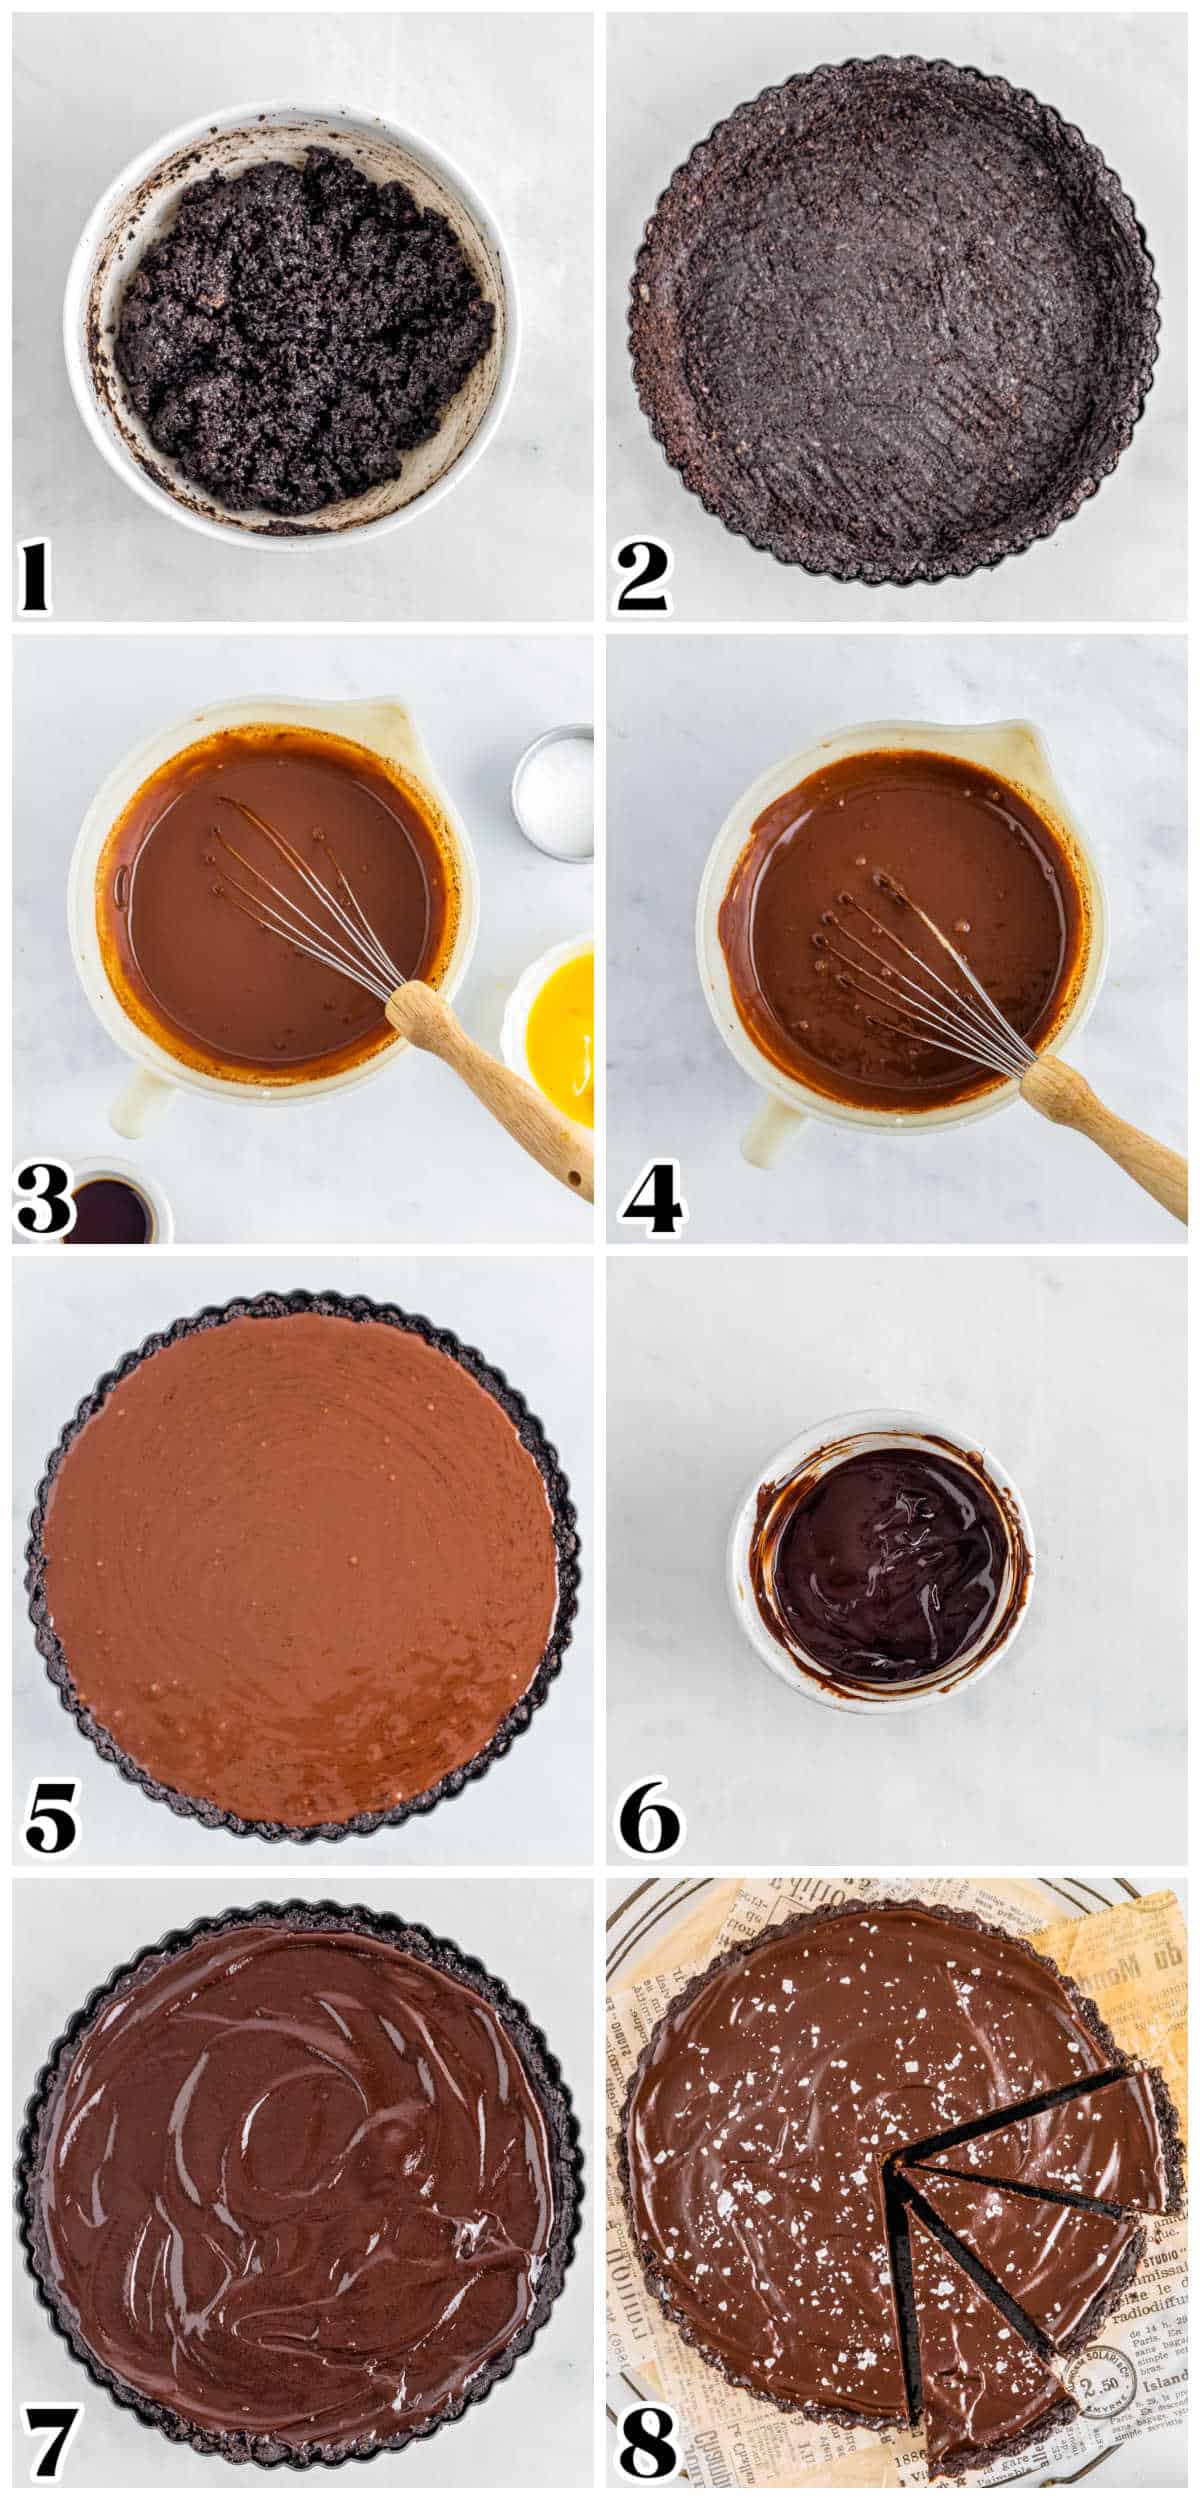 A picture collage showing how to make this recipe from the Oreo crust to the chocolate ganache glaze.